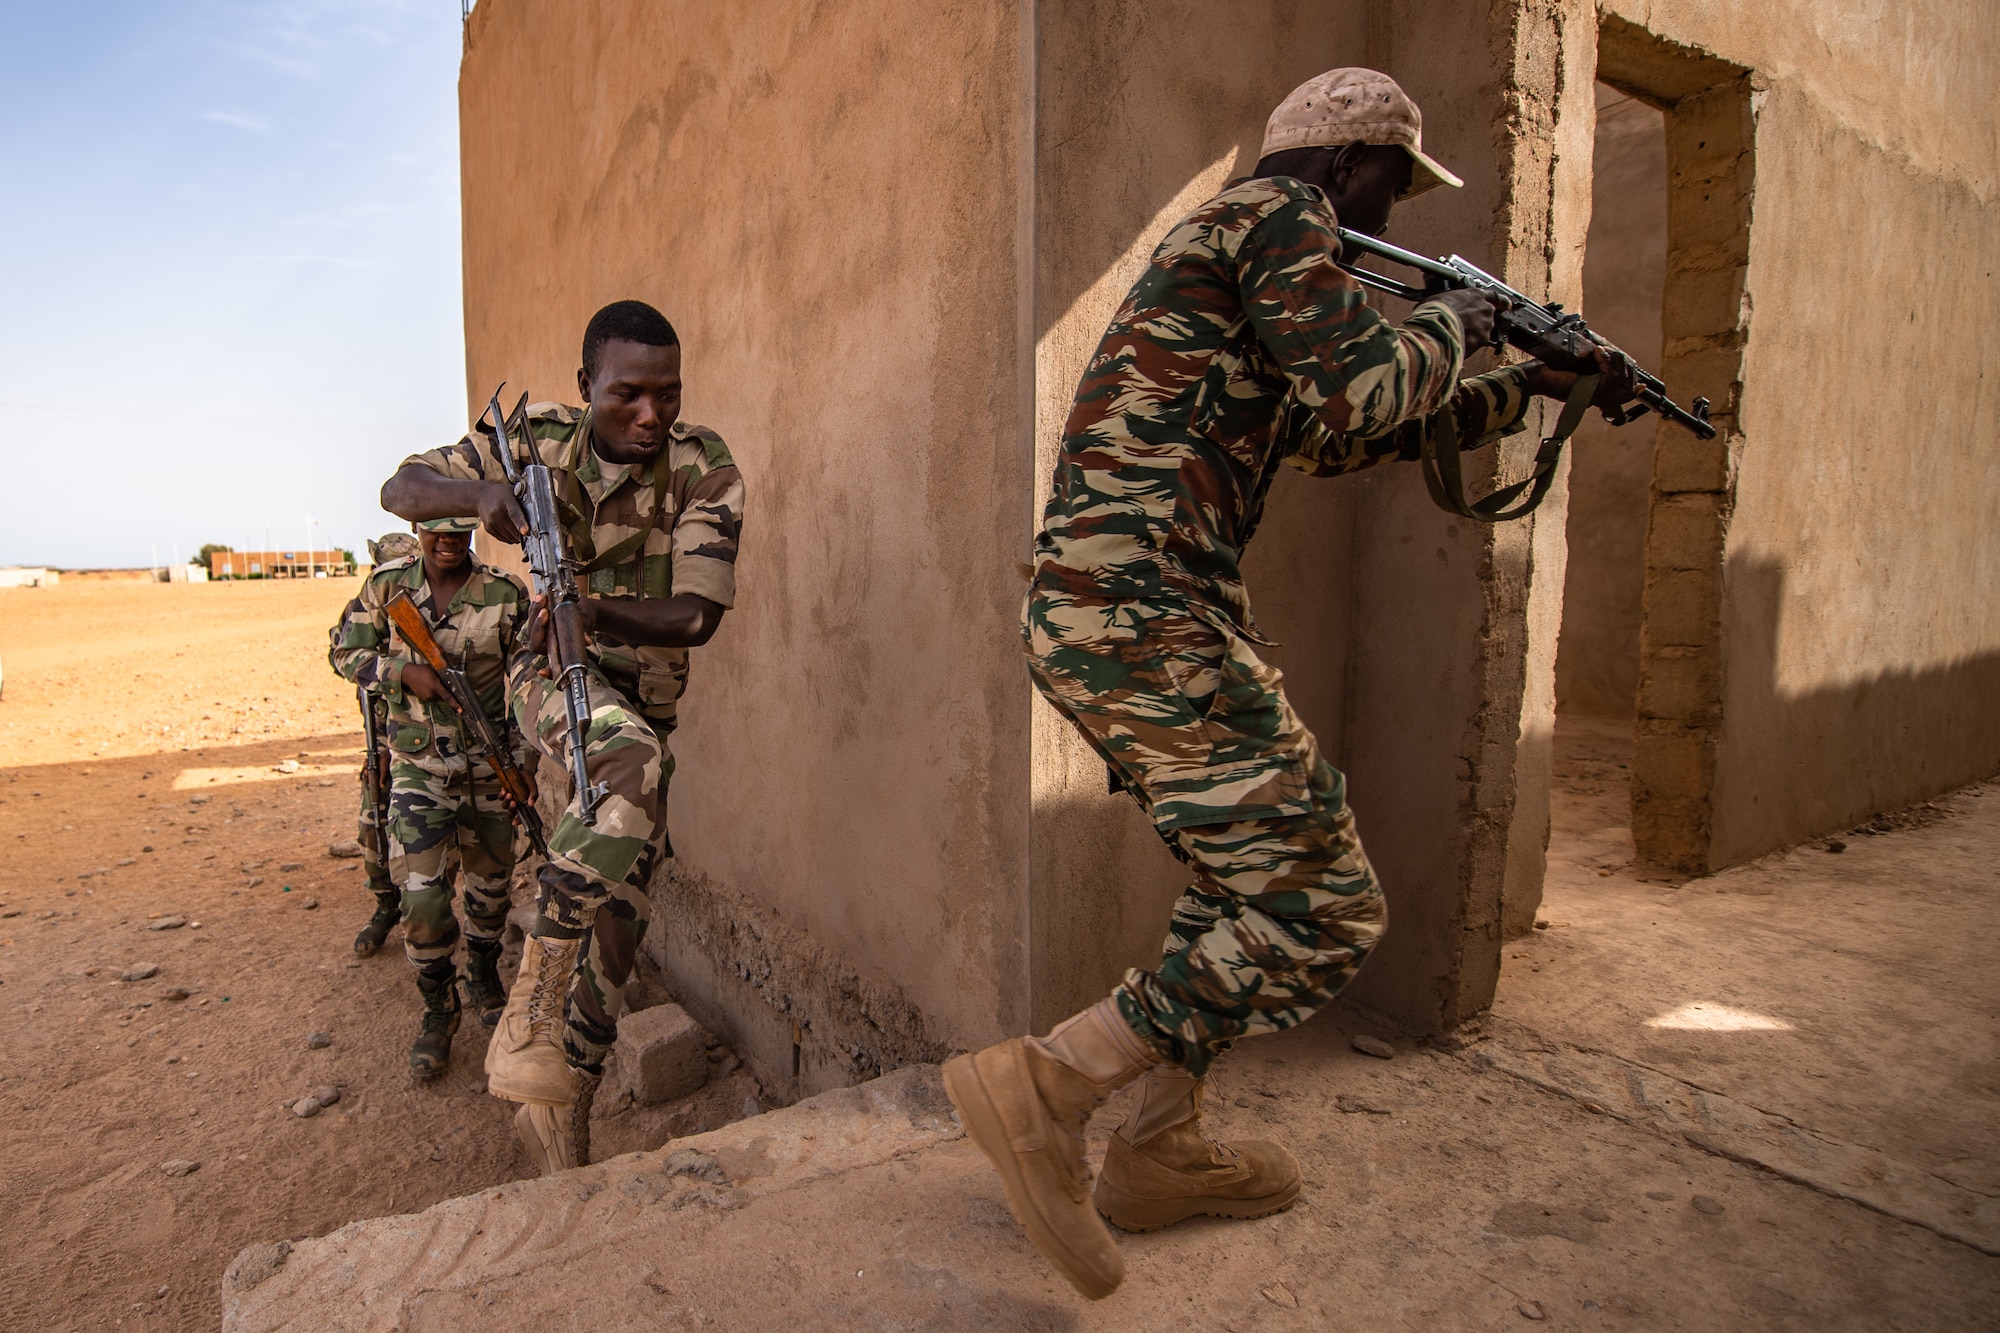 Niger Armed Forces (French language: Forces Armées Nigeriennes) members run into a building during a training exercise with the 409th Expeditionary Security Forces Squadron air advisors at the FAN compound on Nigerien Air Base 201 in Agadez, Niger, July 10, 2019. The air advisors taught them how to efficiently clear a building while keeping their comrades safe. (U.S. Air Force photo by Staff Sgt. Devin Boyer)